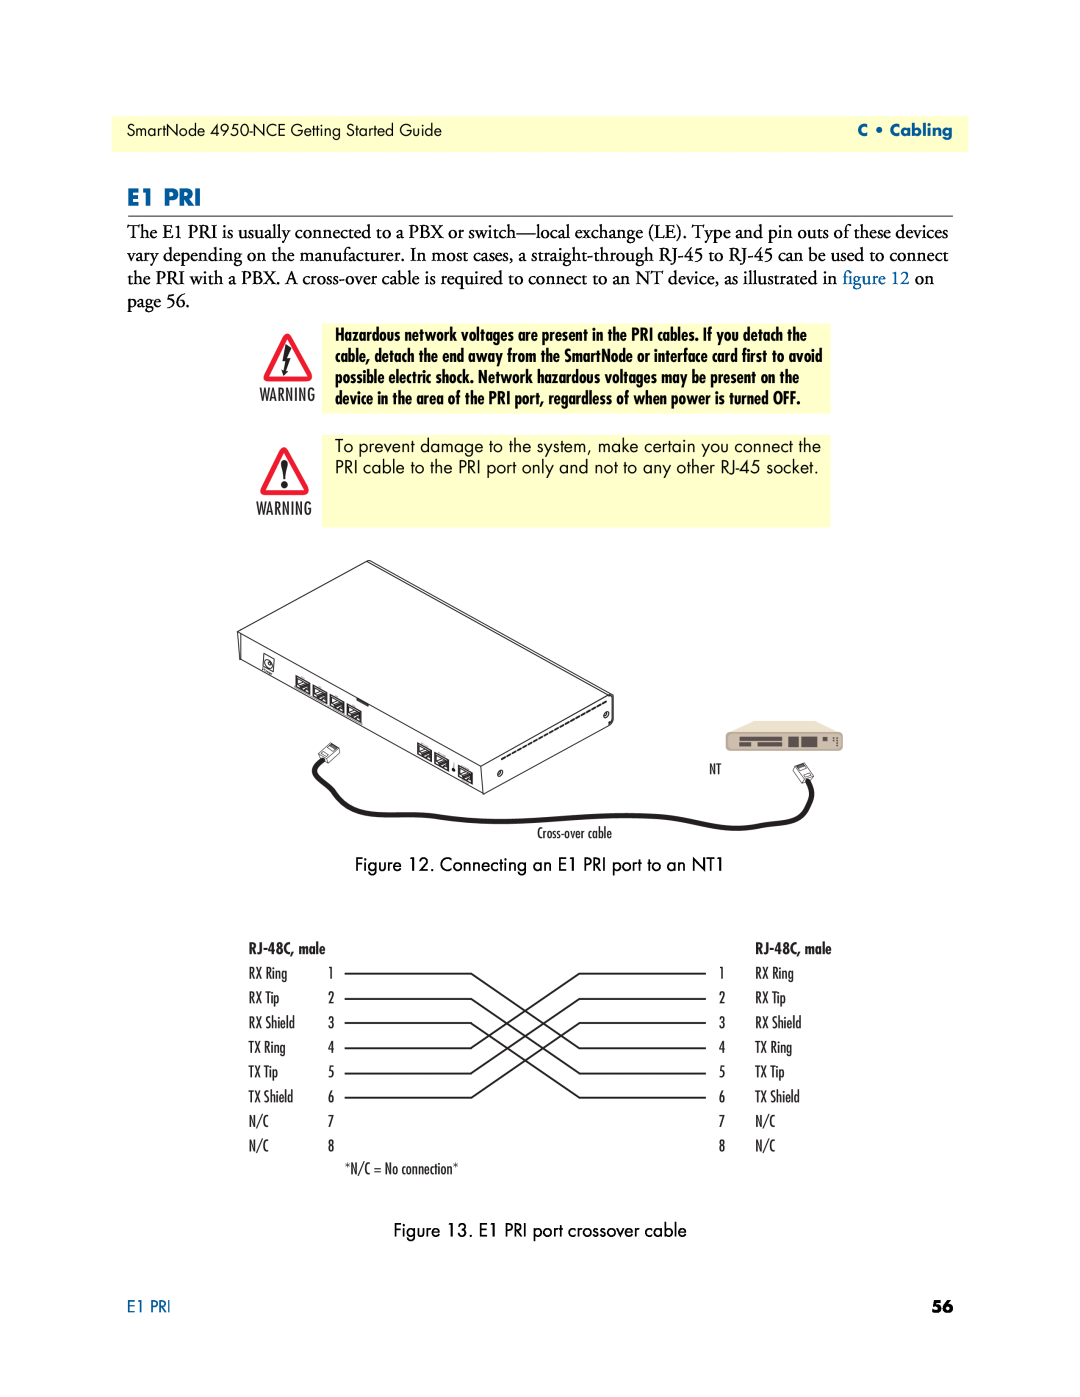 Patton electronic 4950-NCE manual Connecting an E1 PRI port to an NT1, E1 PRI port crossover cable, C Cabling 